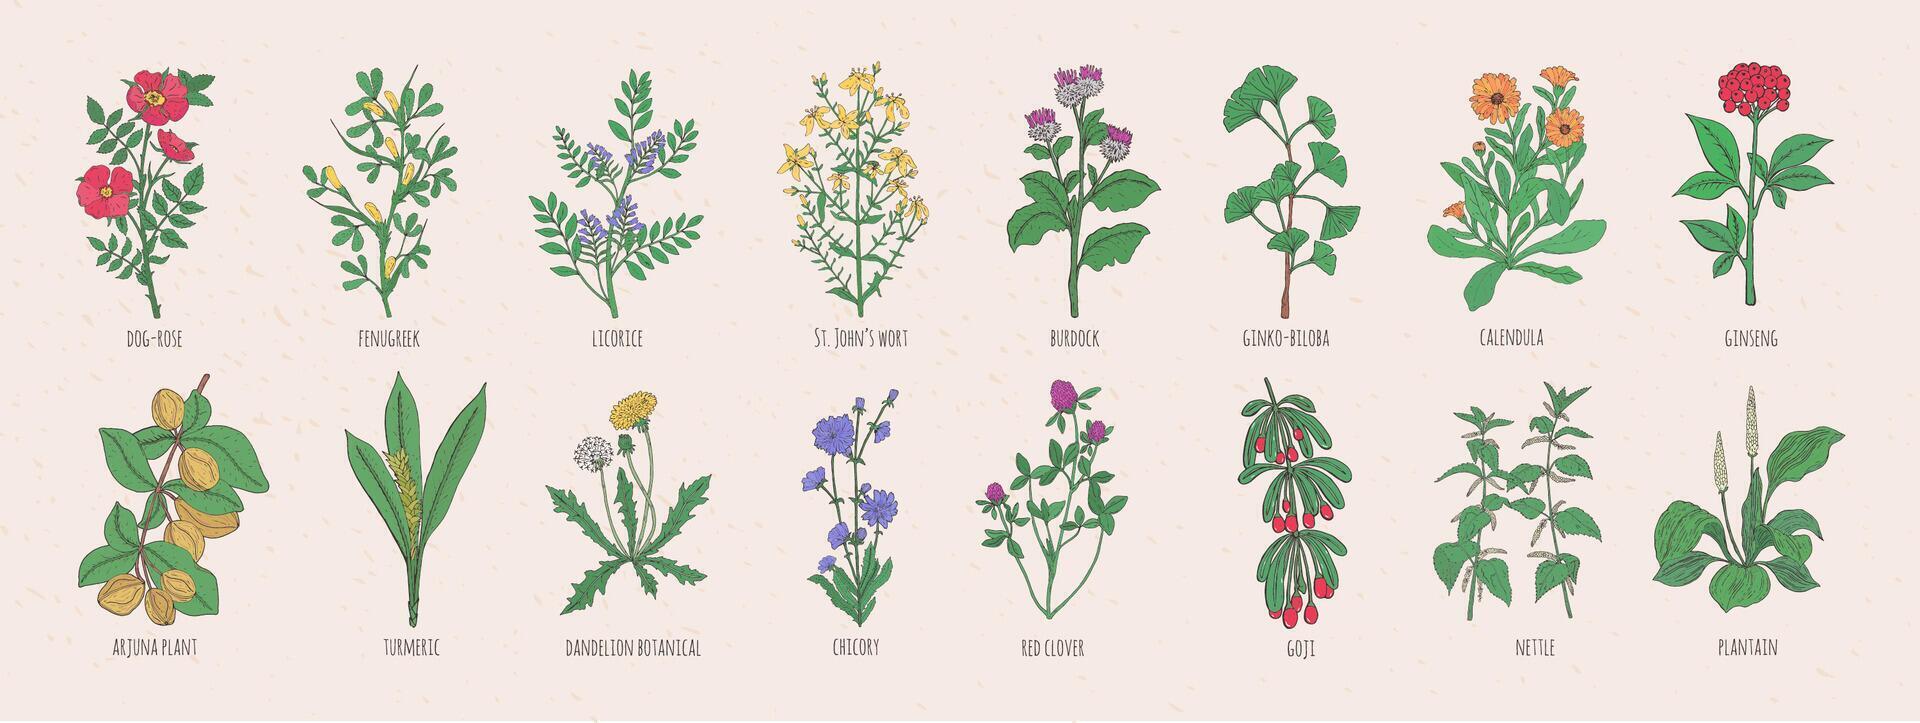 Collection of wild meadow herbs, blooming flowers and tropical plants with edible berries hand drawn in vintage style and isolated on white background. Detailed botanical illustration. vector